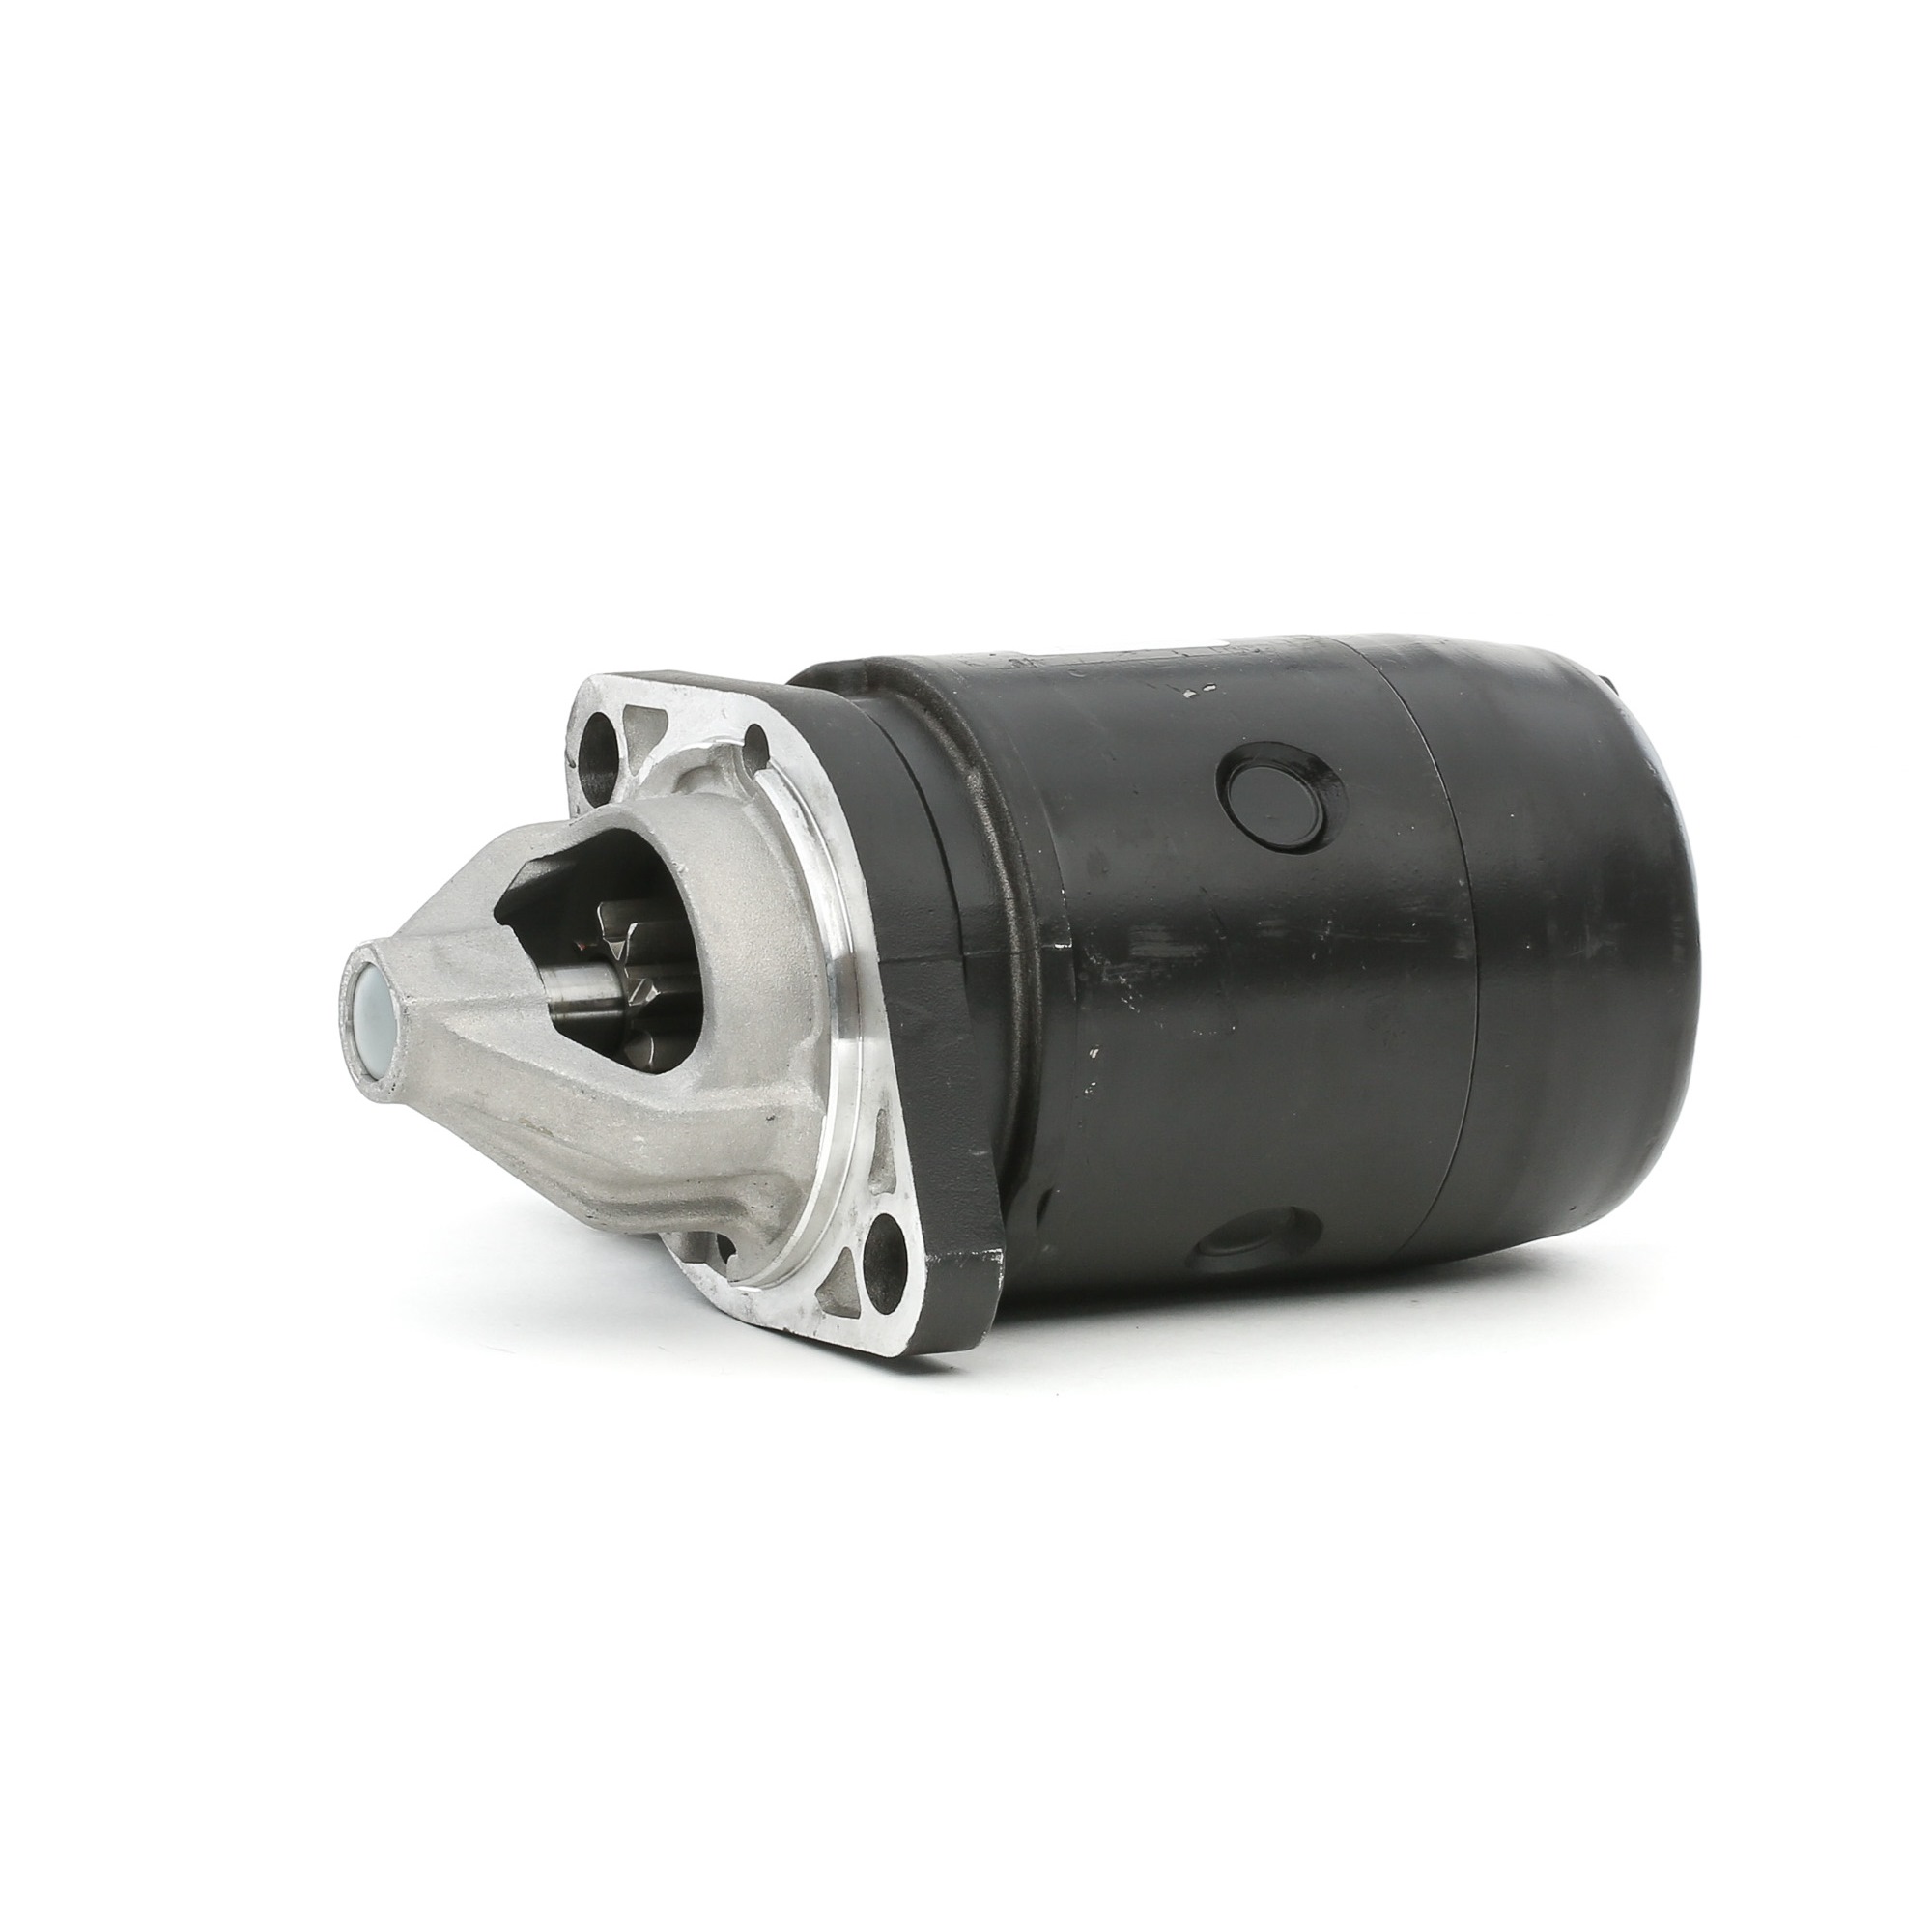 RIDEX REMAN 2S0533R Starter motor 12V, 0,9kW, Number of Teeth: 8,11, with 50(Jet) clamp, Ø 74 mm